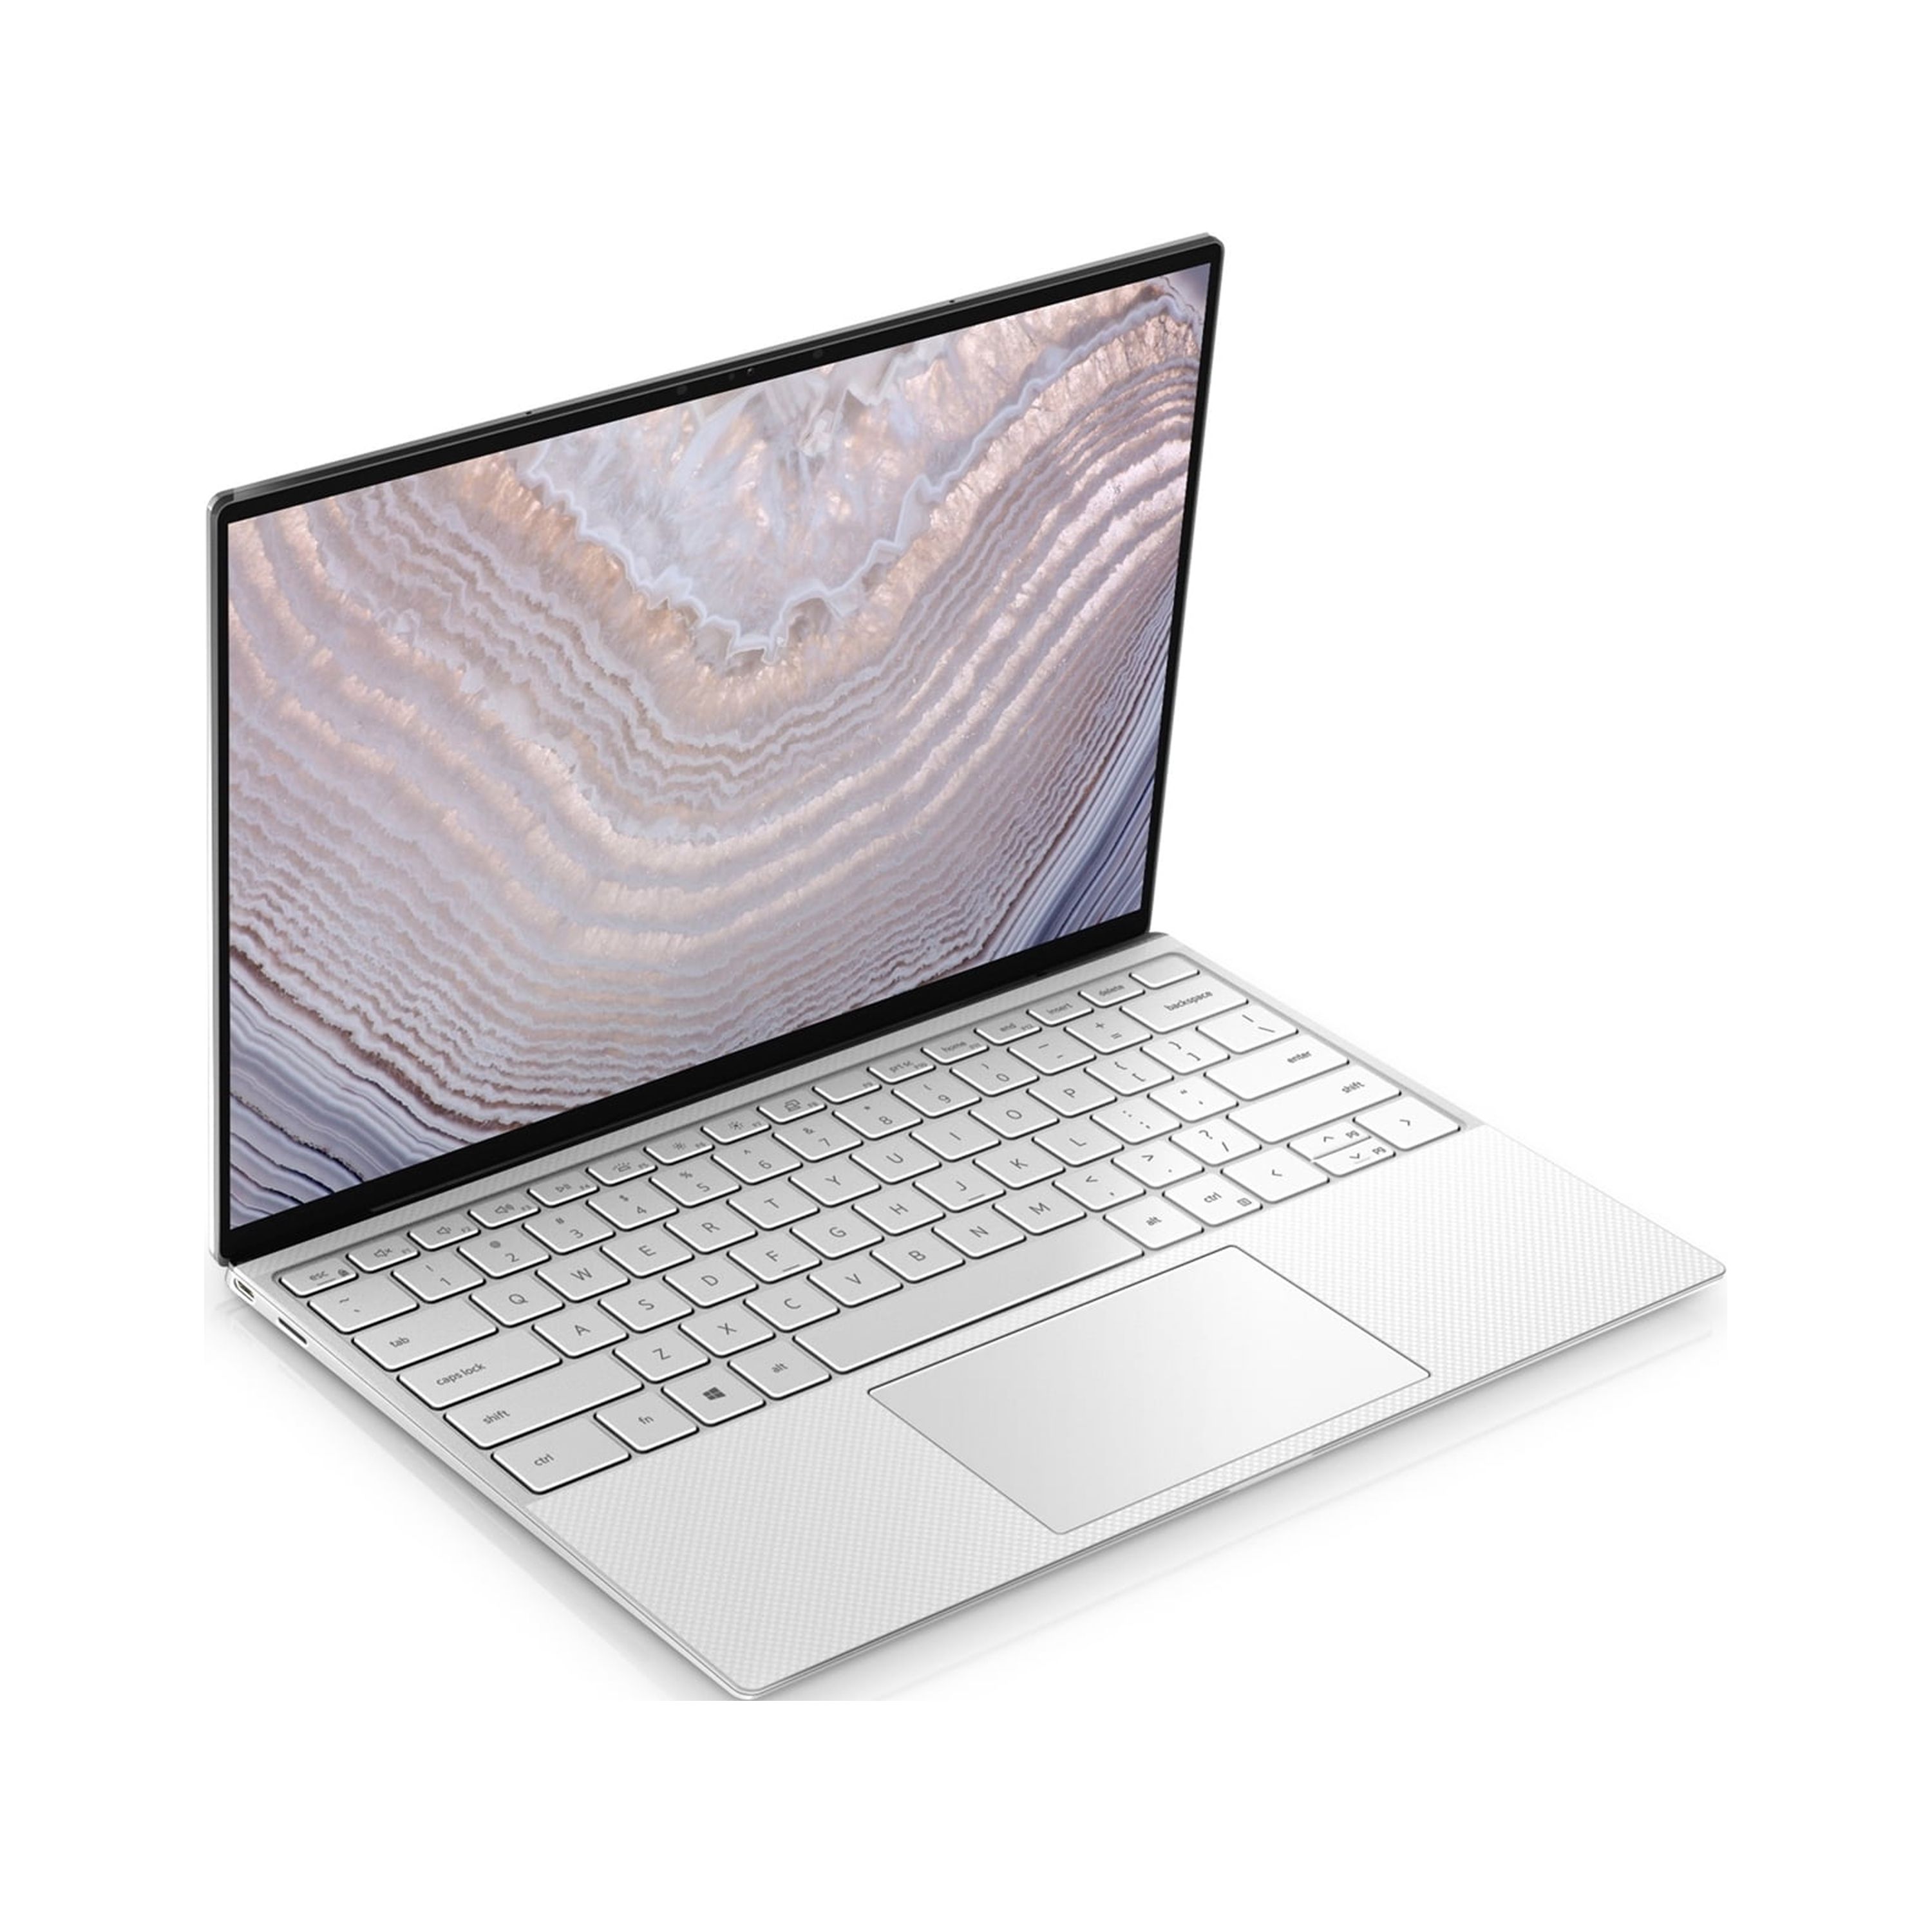 Dell XPS 9310 13.4" Touch 8GB 256GB SSD Core™ i7-1165G7 1.2GHz Win10H,&nbsp;Frost White (Used) - image 1 of 2